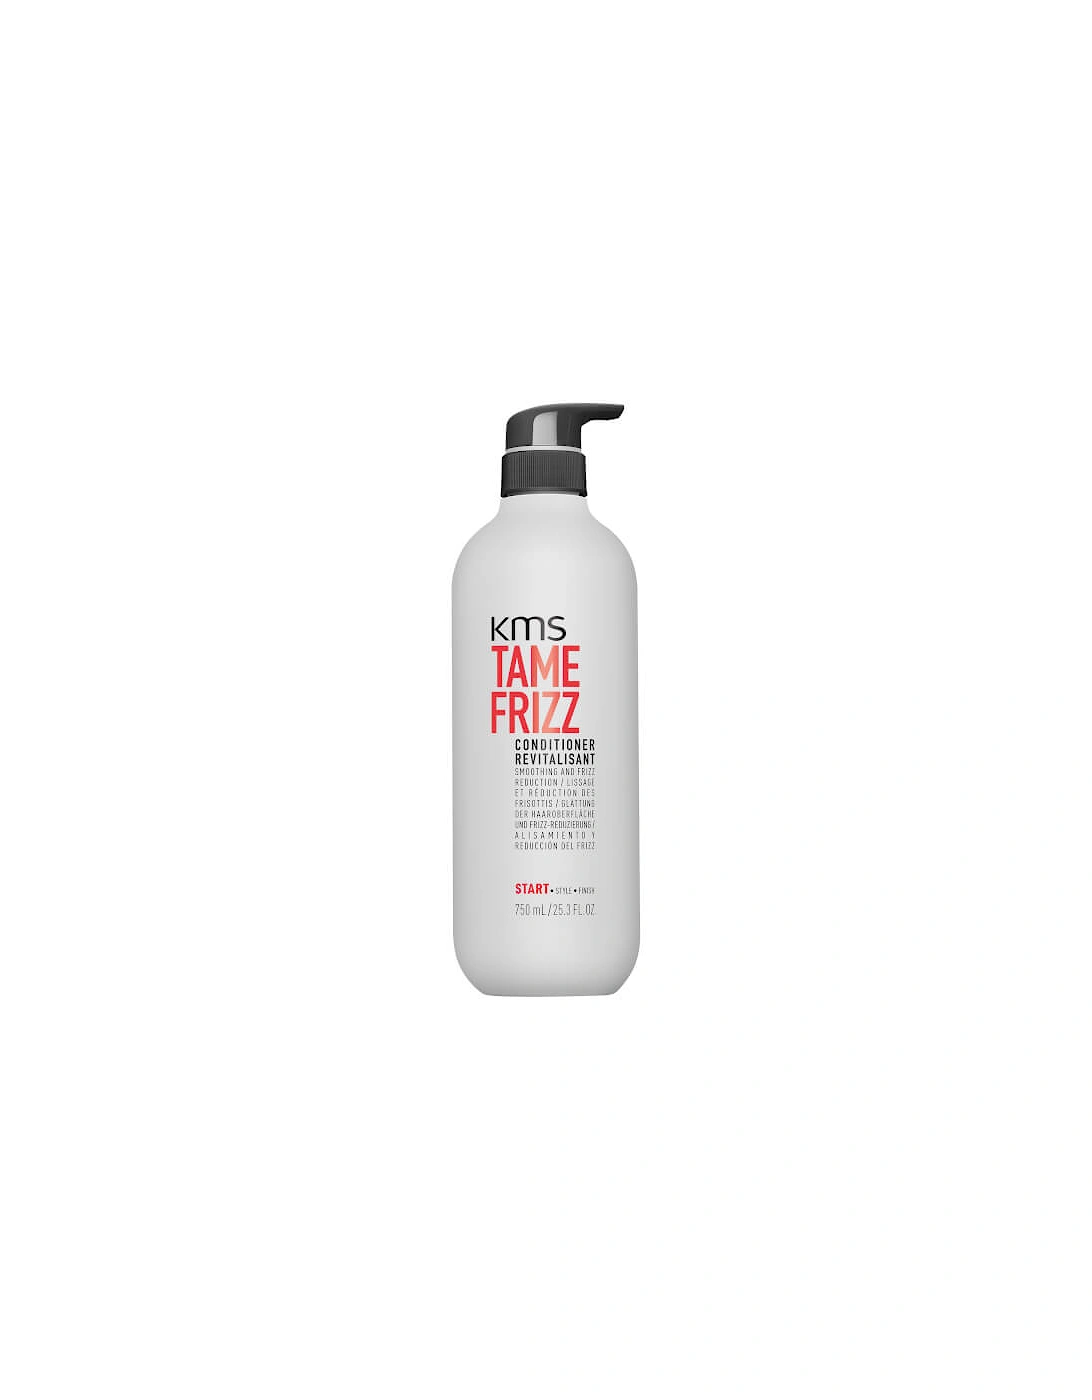 Tame Frizz Conditioner 750ml - KMS, 2 of 1